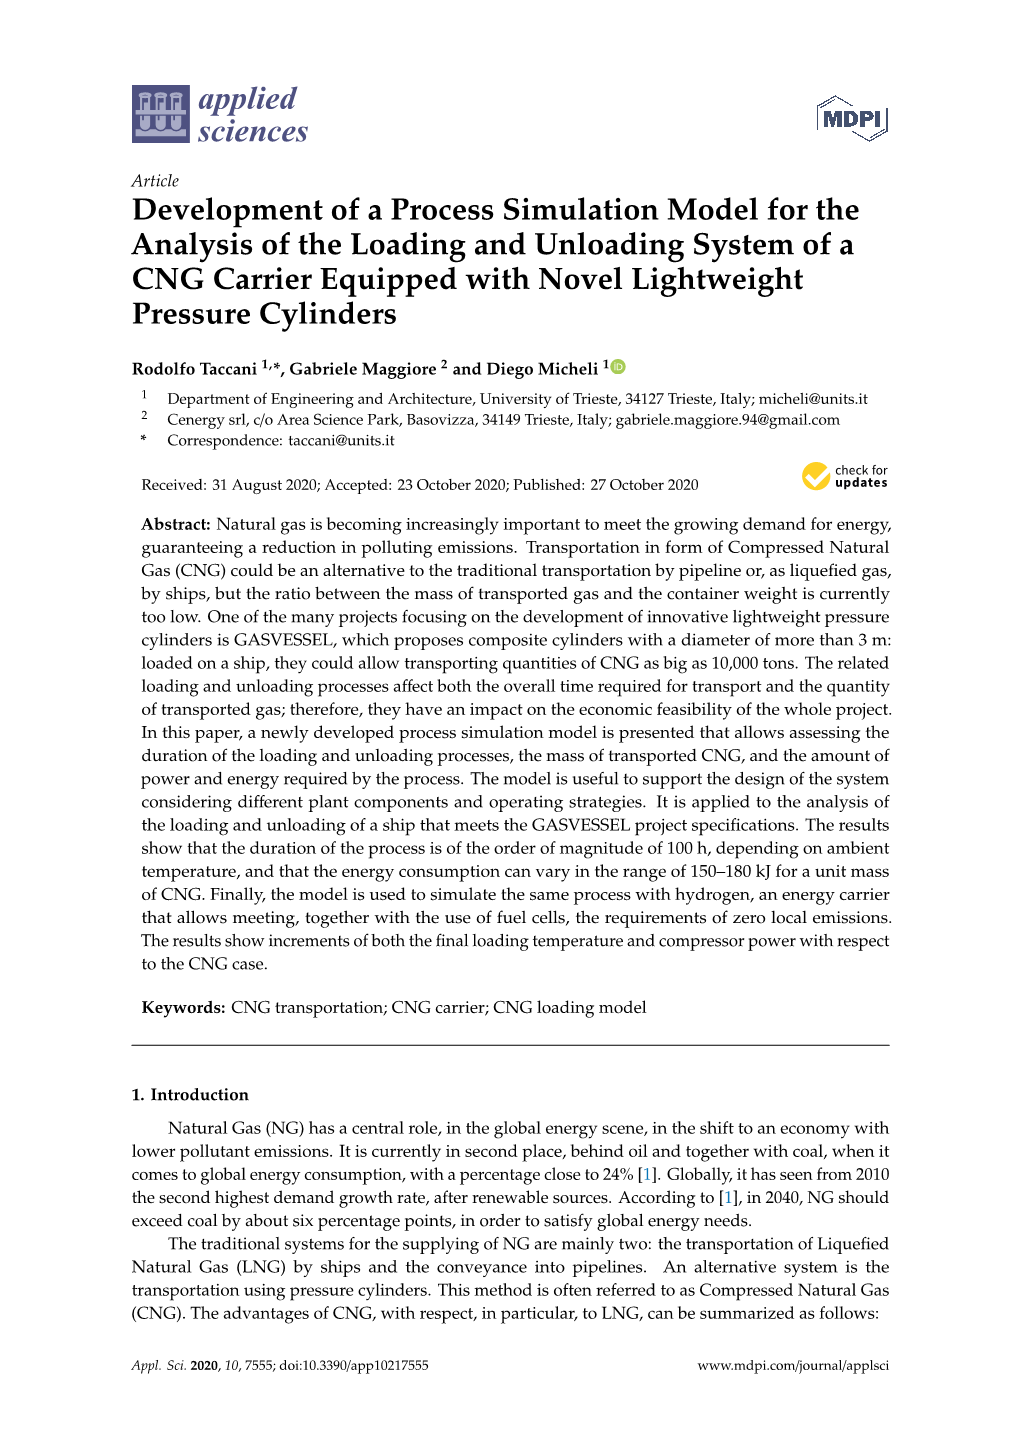 Development of a Process Simulation Model for the Analysis of the Loading and Unloading System of a CNG Carrier Equipped with Novel Lightweight Pressure Cylinders